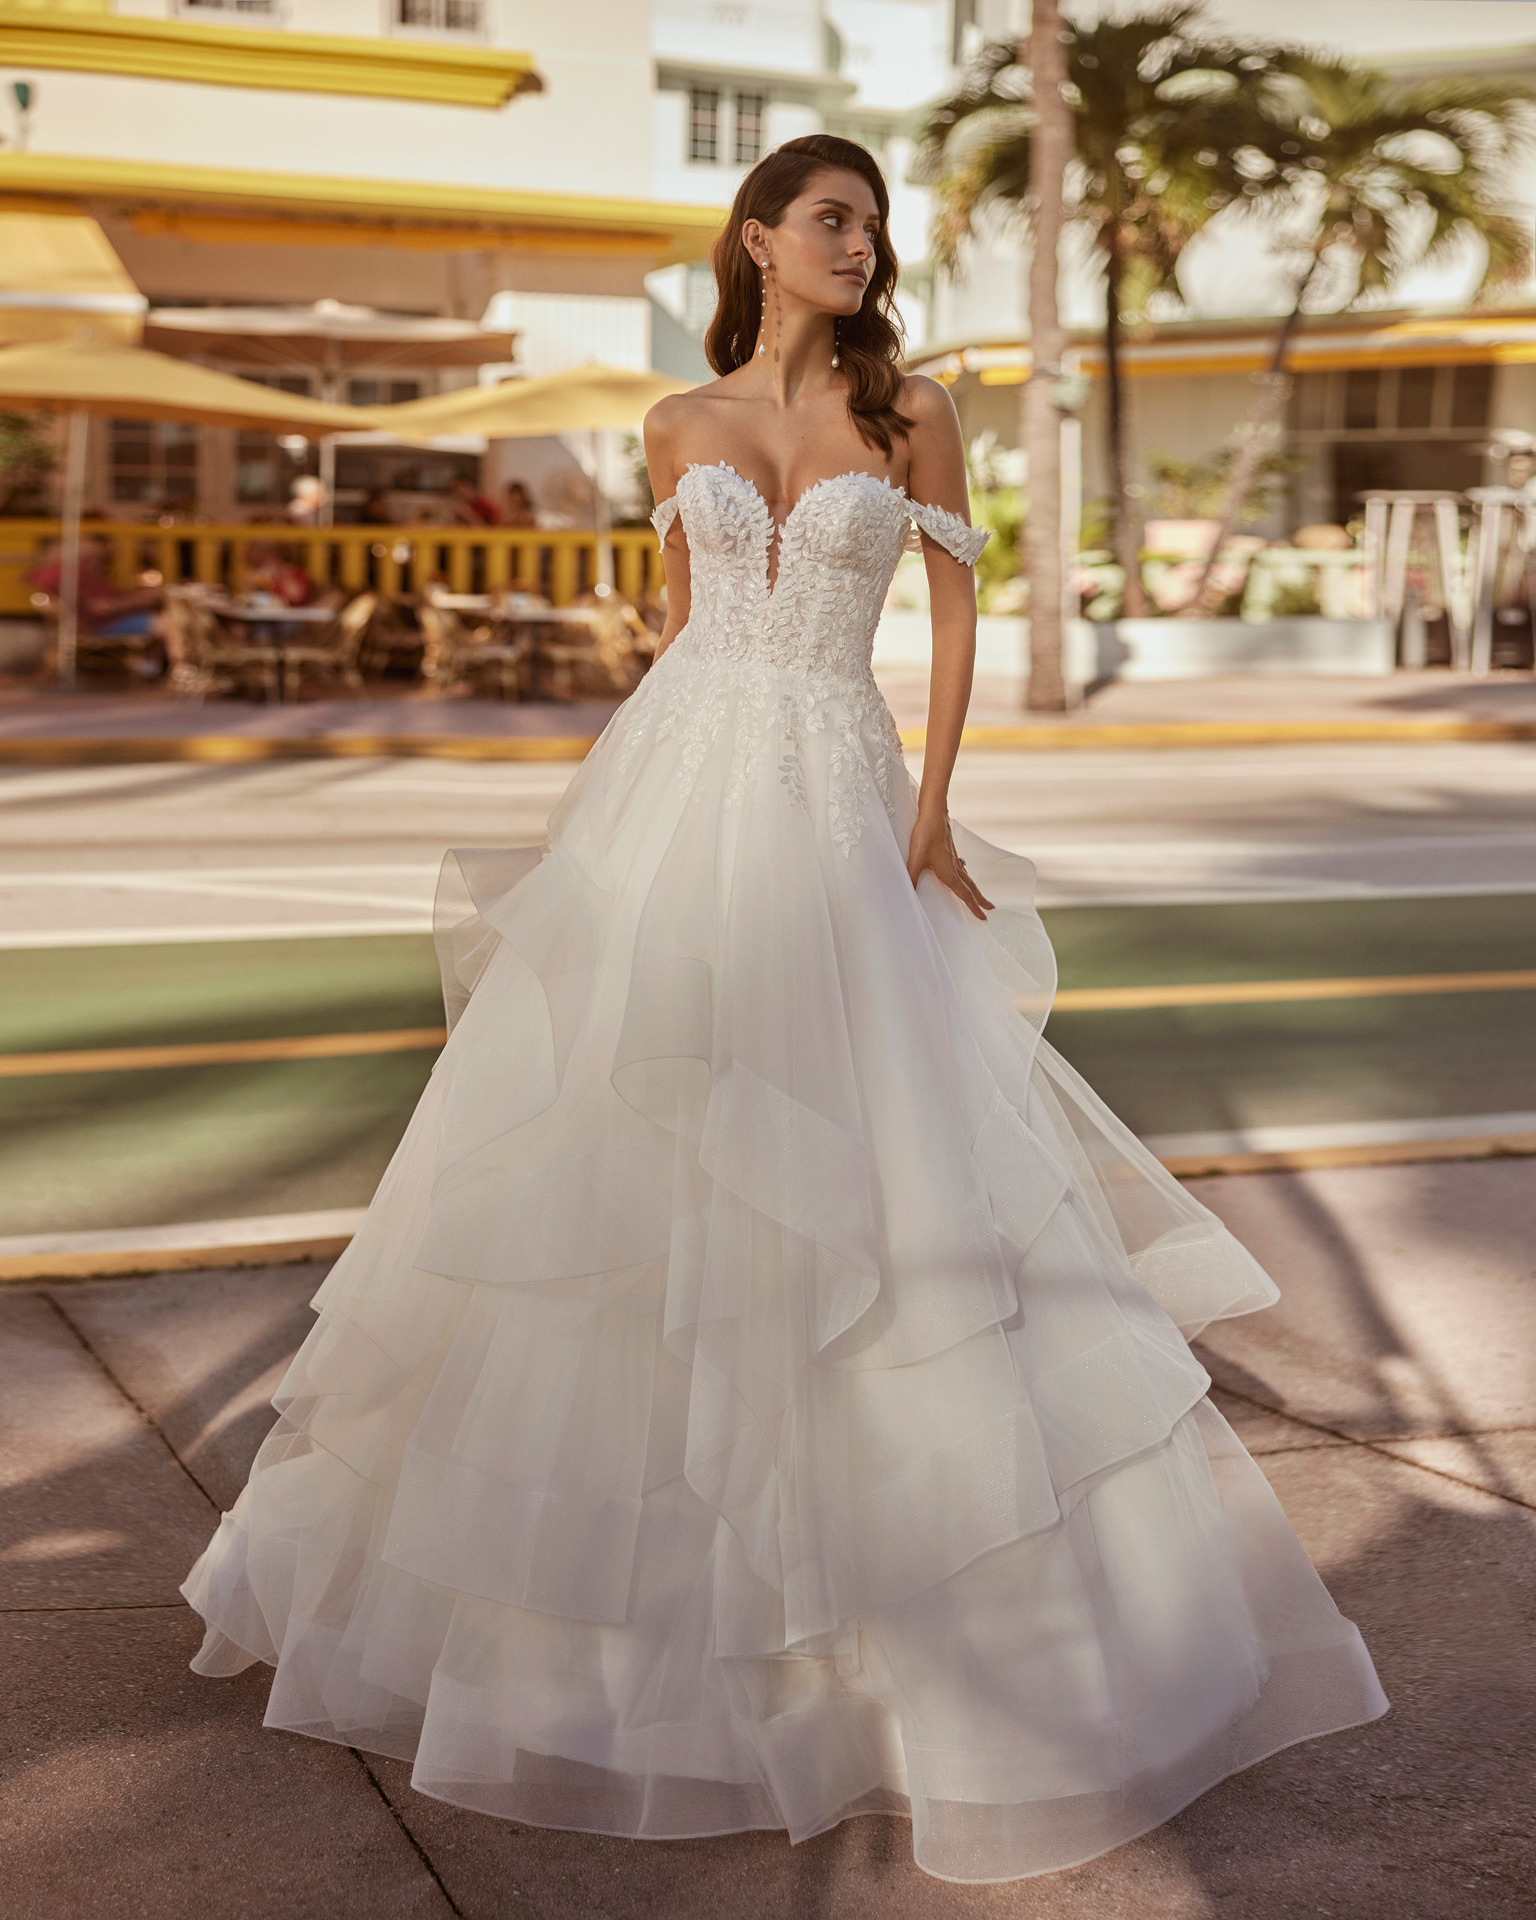 Classic princess wedding dress. Crafted in tulle, the gown features a sweetheart neckline, buttoned back, and detachable straps. Showcase the lace and beadwork bodice of this delicate Luna Novias design. LUNA_NOVIAS.